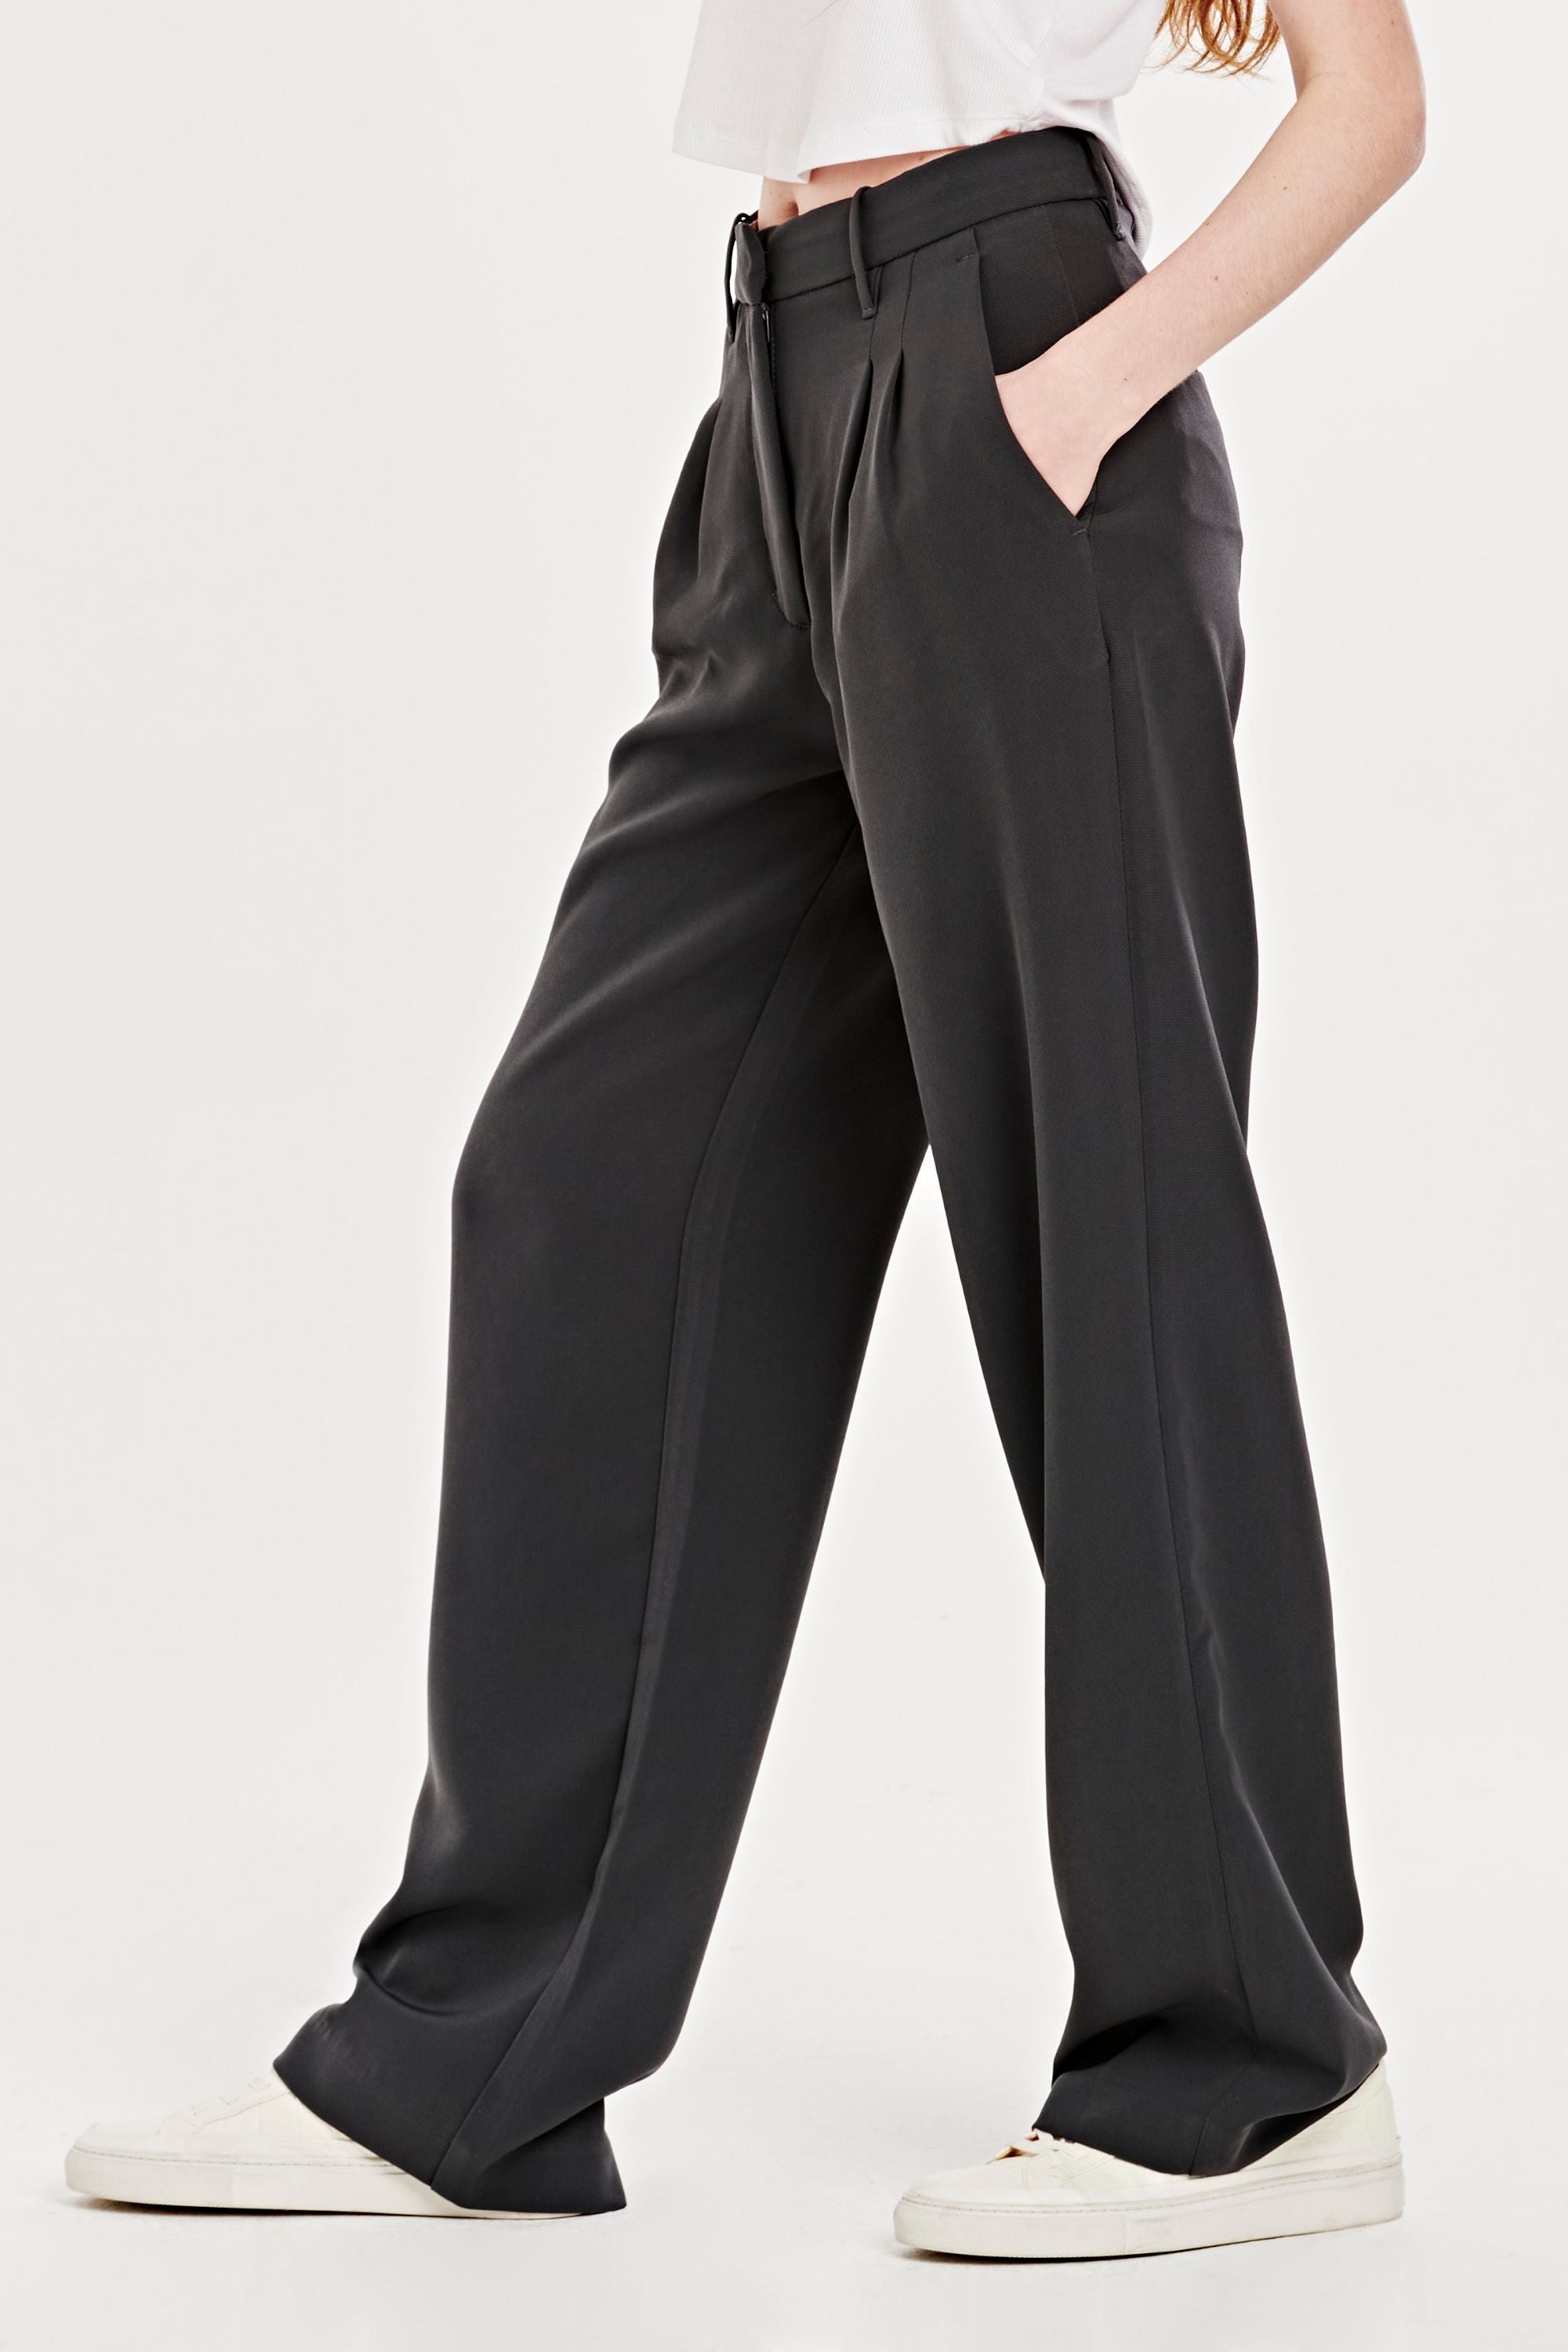 ADELAIDE TROUSERS